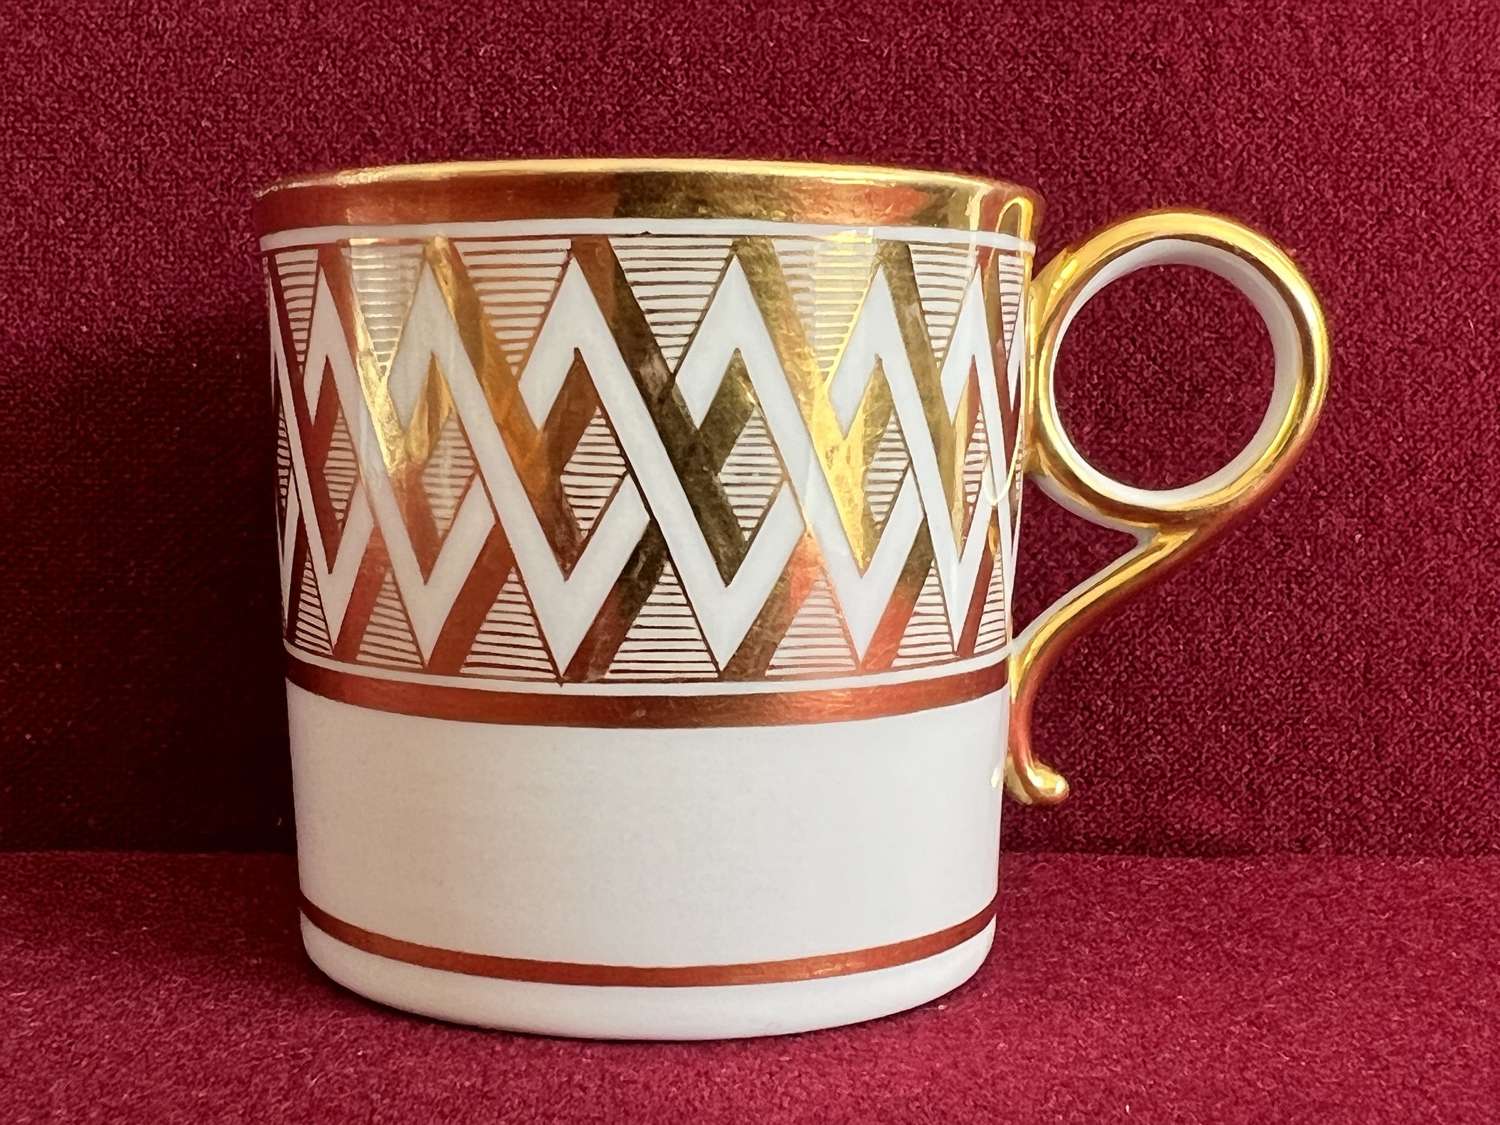 A Barr Worcester Porcelain Coffee Can c.1800-1804